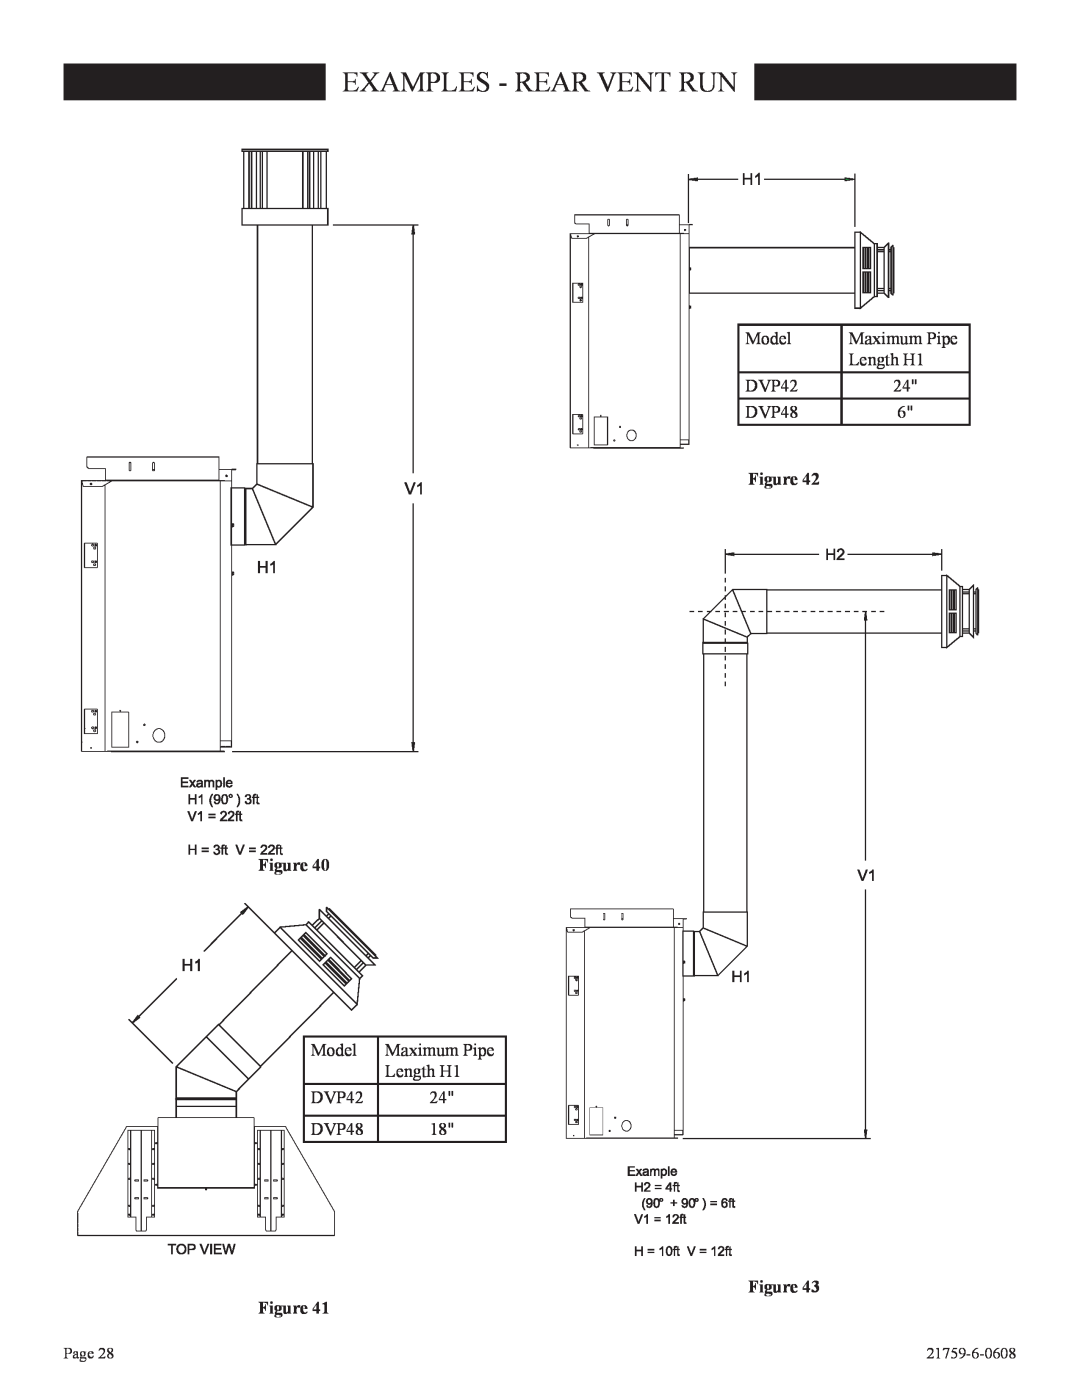 Empire Comfort Systems P)-2, DVP42FP installation instructions Examples - Rear Vent Run, Figure Figure 